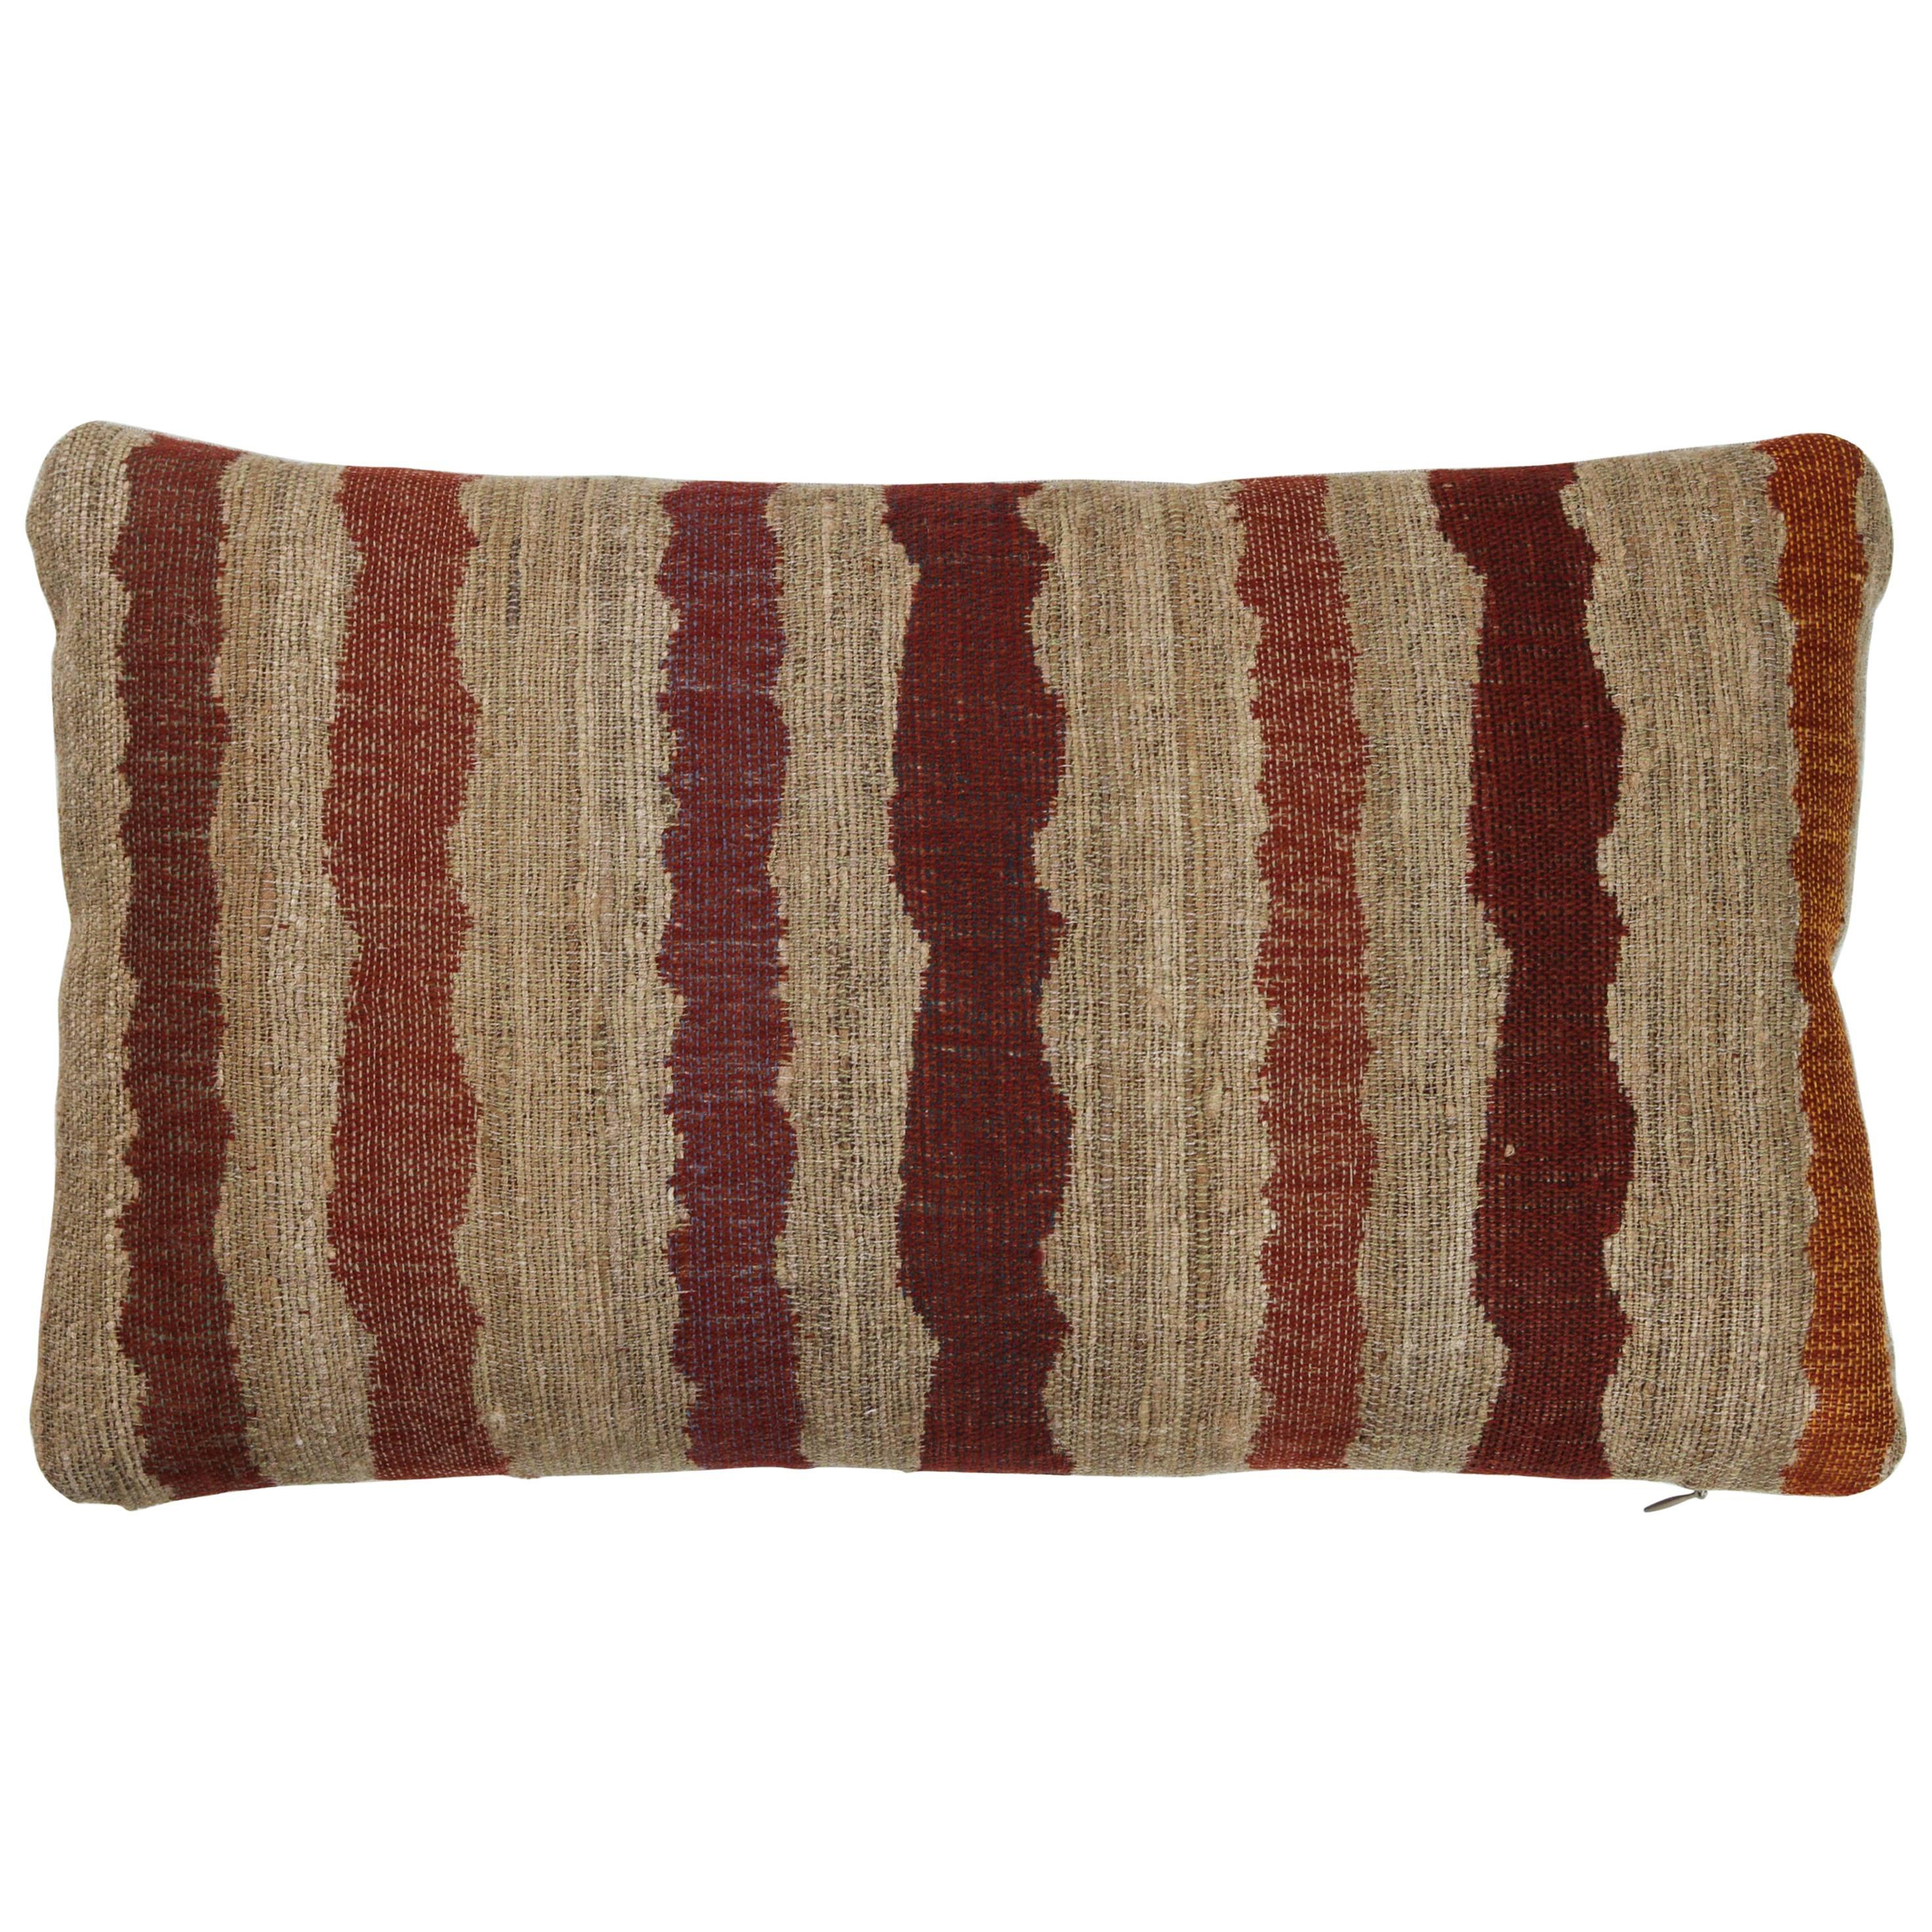 Indian Handwoven Pillow in Orange, Oatmeal and Burgundy For Sale